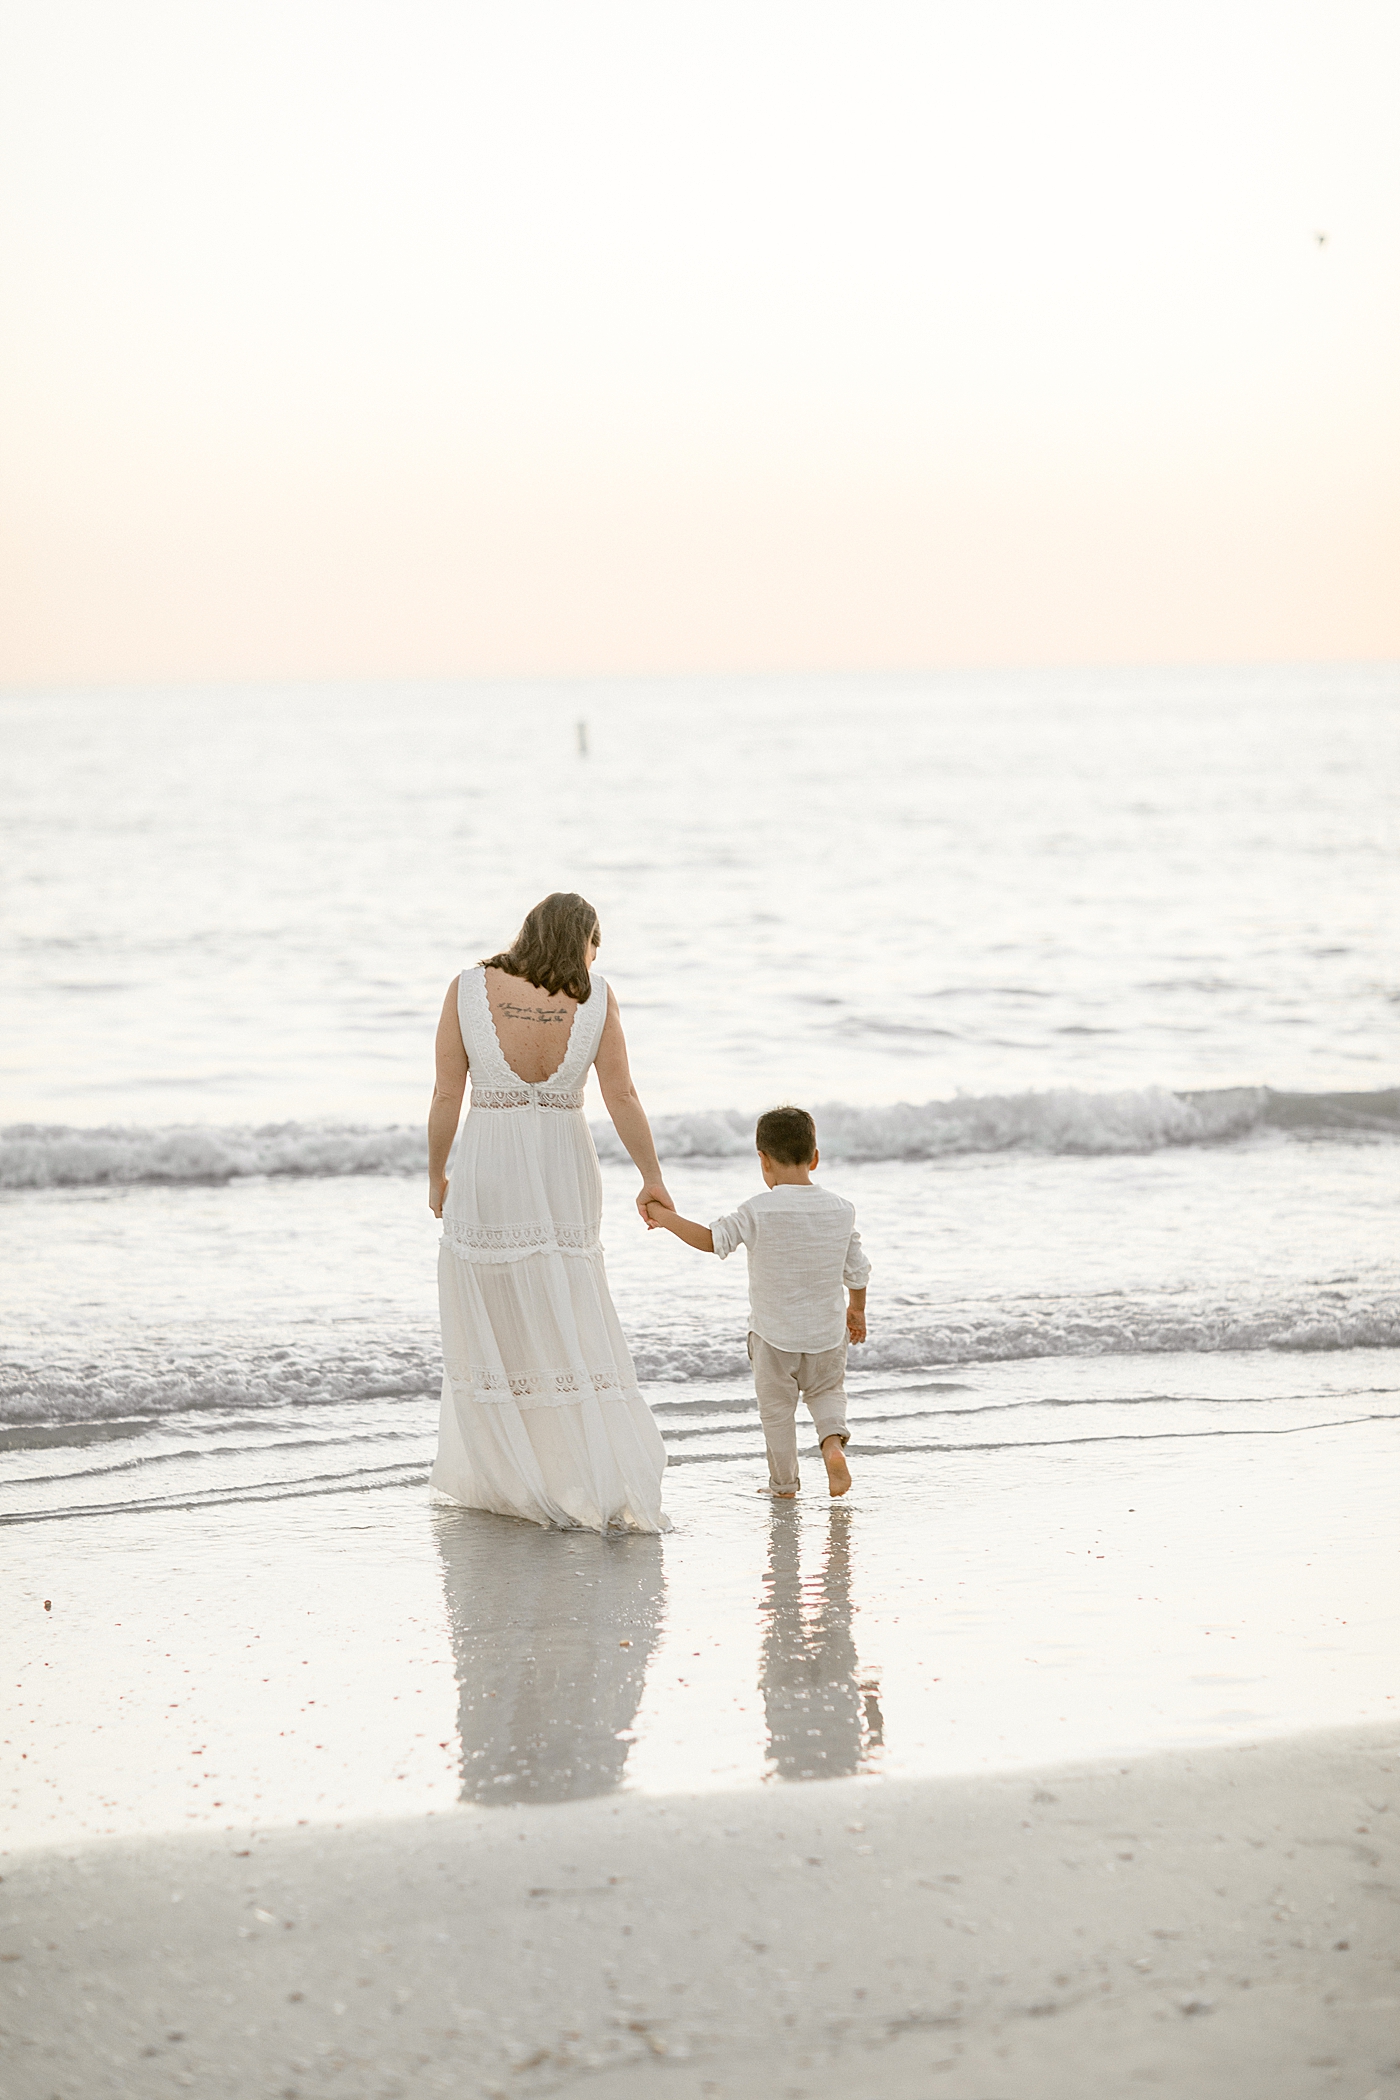 Mom and son holding hands by the water on the beach at sunset. Photos by Brittany Elise Photography.